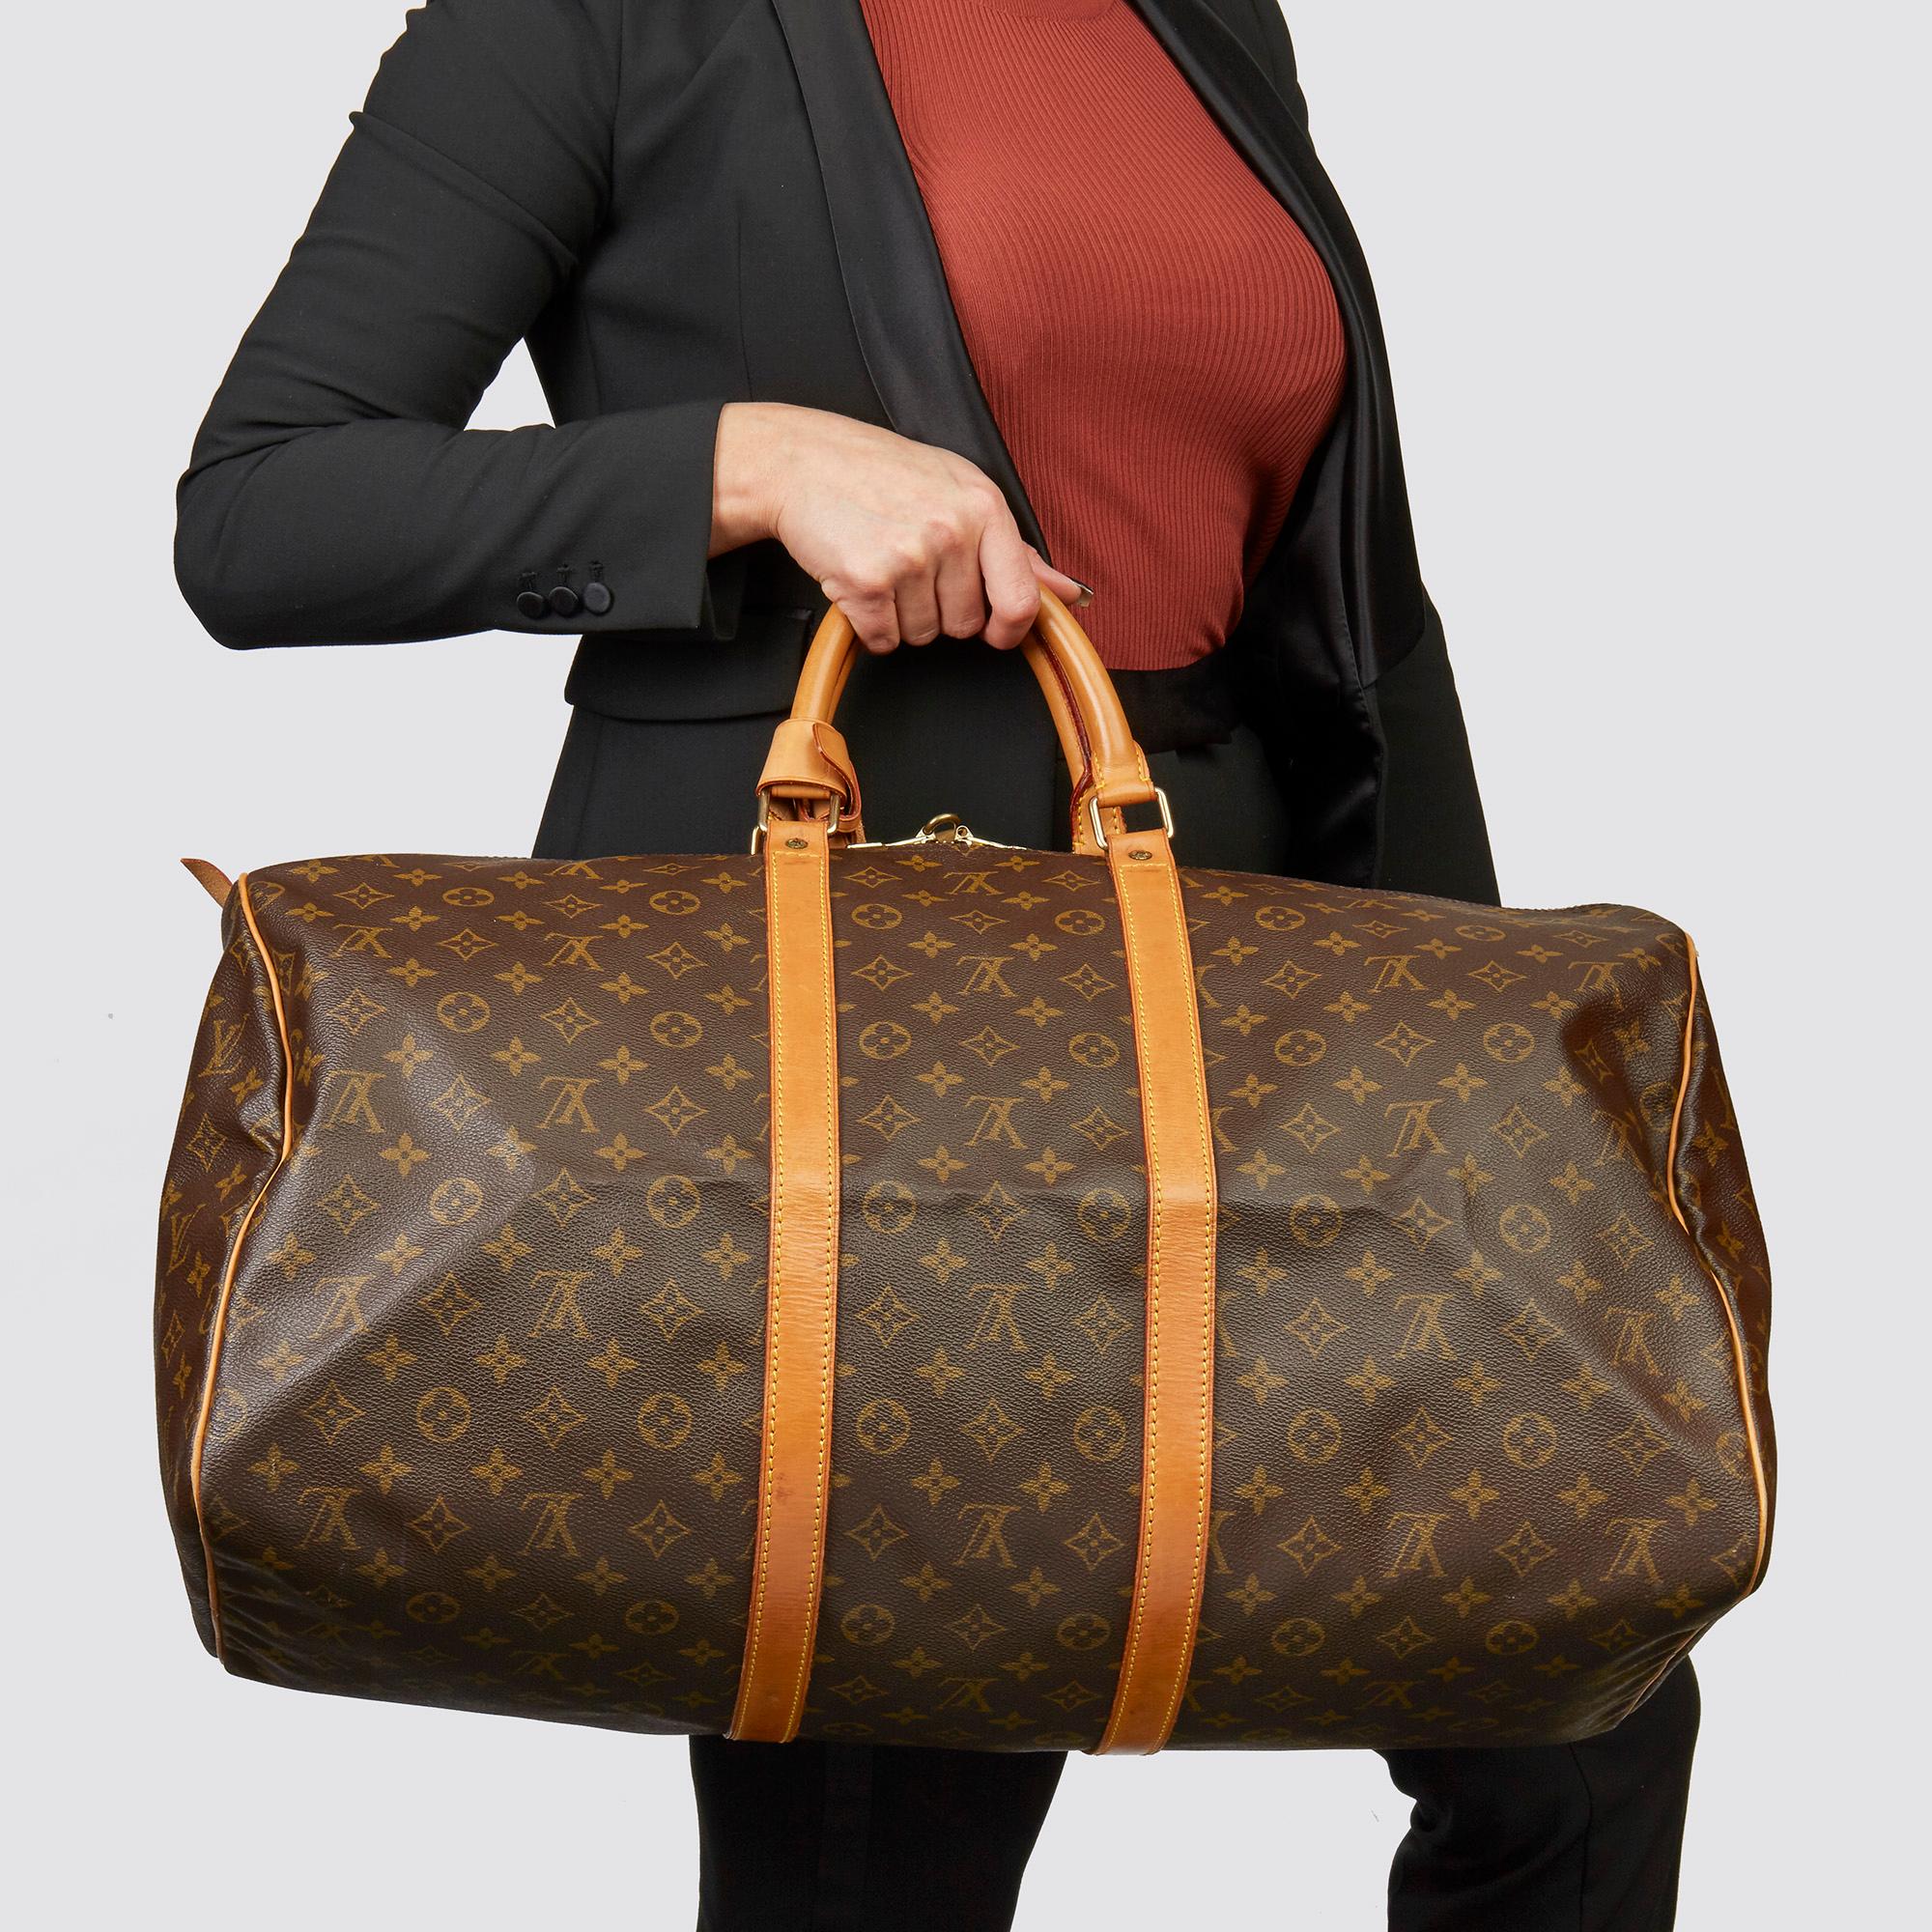 LOUIS VUITTON
Brown Monogram Coated Canvas & Vachetta Leather Vintage Keepall 55

Xupes Reference: HB3582
Serial Number: FL1011
Age (Circa): 2001
Accompanied By: Handle Keeper, Luggage Tag, Padlock, Keys
Authenticity Details: Date Stamp (Made in